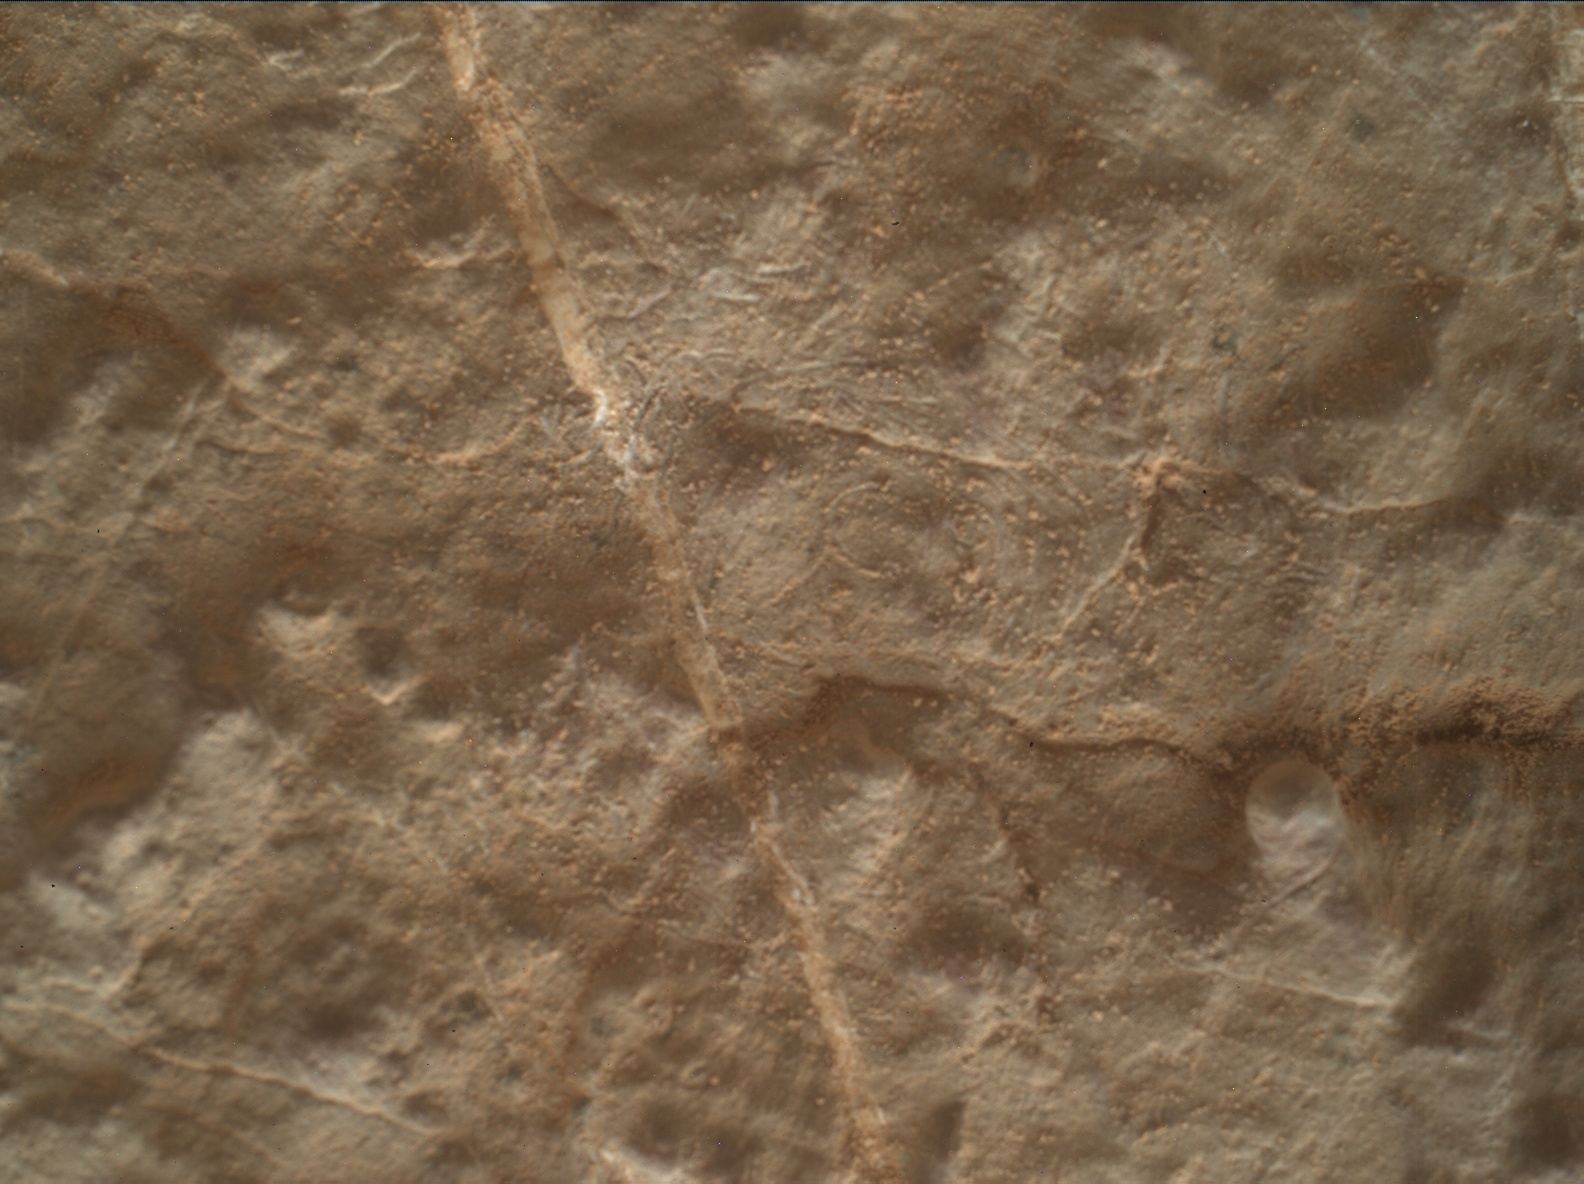 Nasa's Mars rover Curiosity acquired this image using its Mars Hand Lens Imager (MAHLI) on Sol 2653